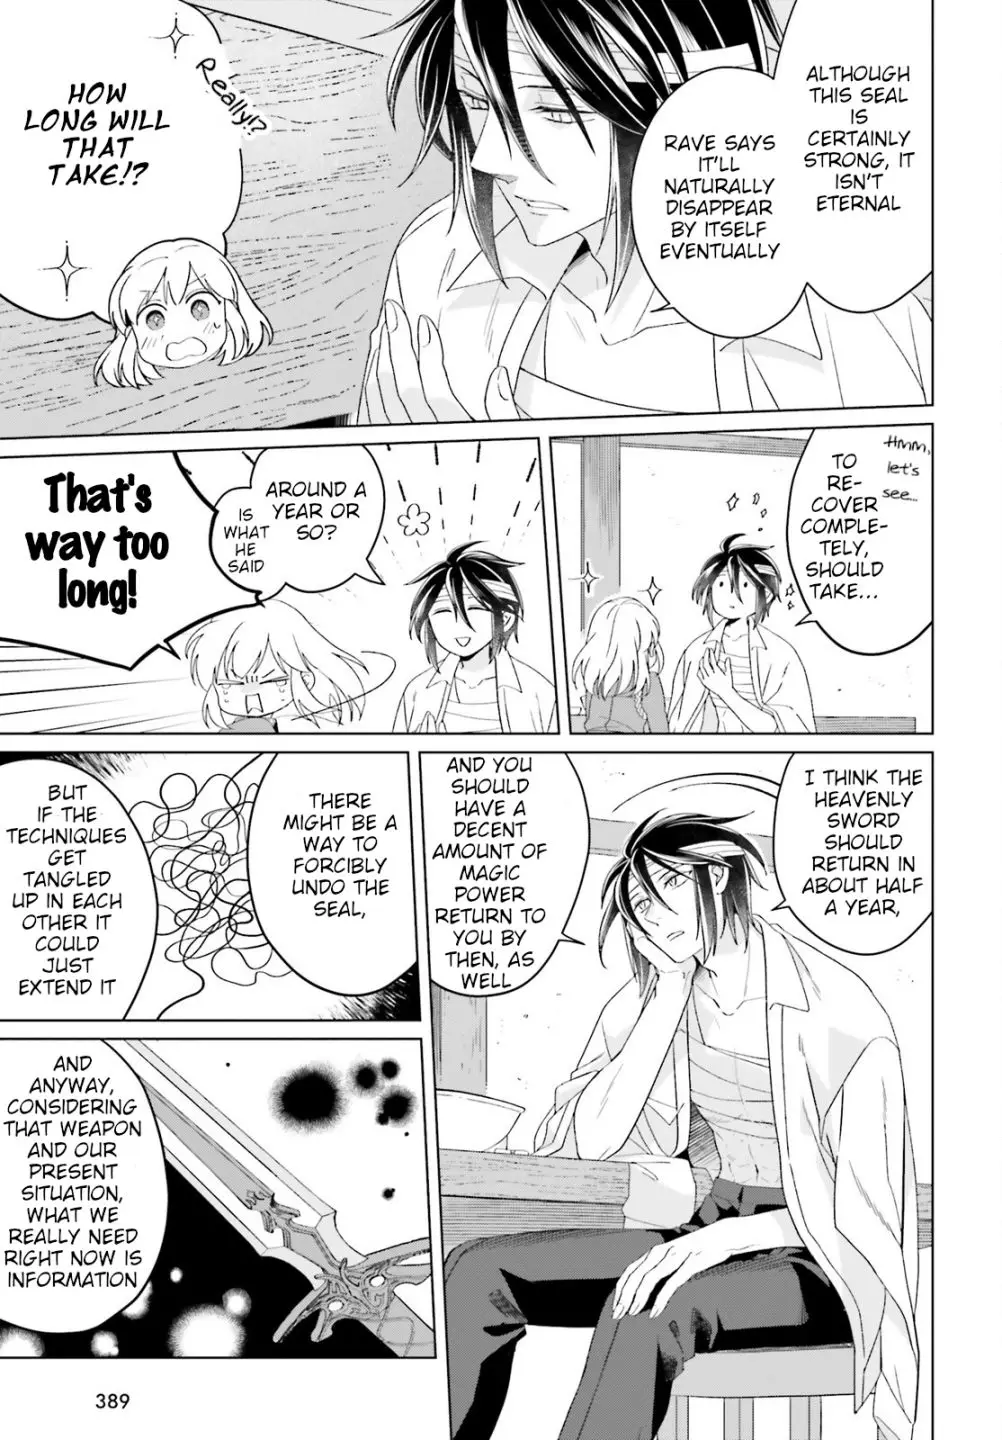 Win Over The Dragon Emperor This Time Around, Noble Girl! - 17 page 7-1a4f8b35